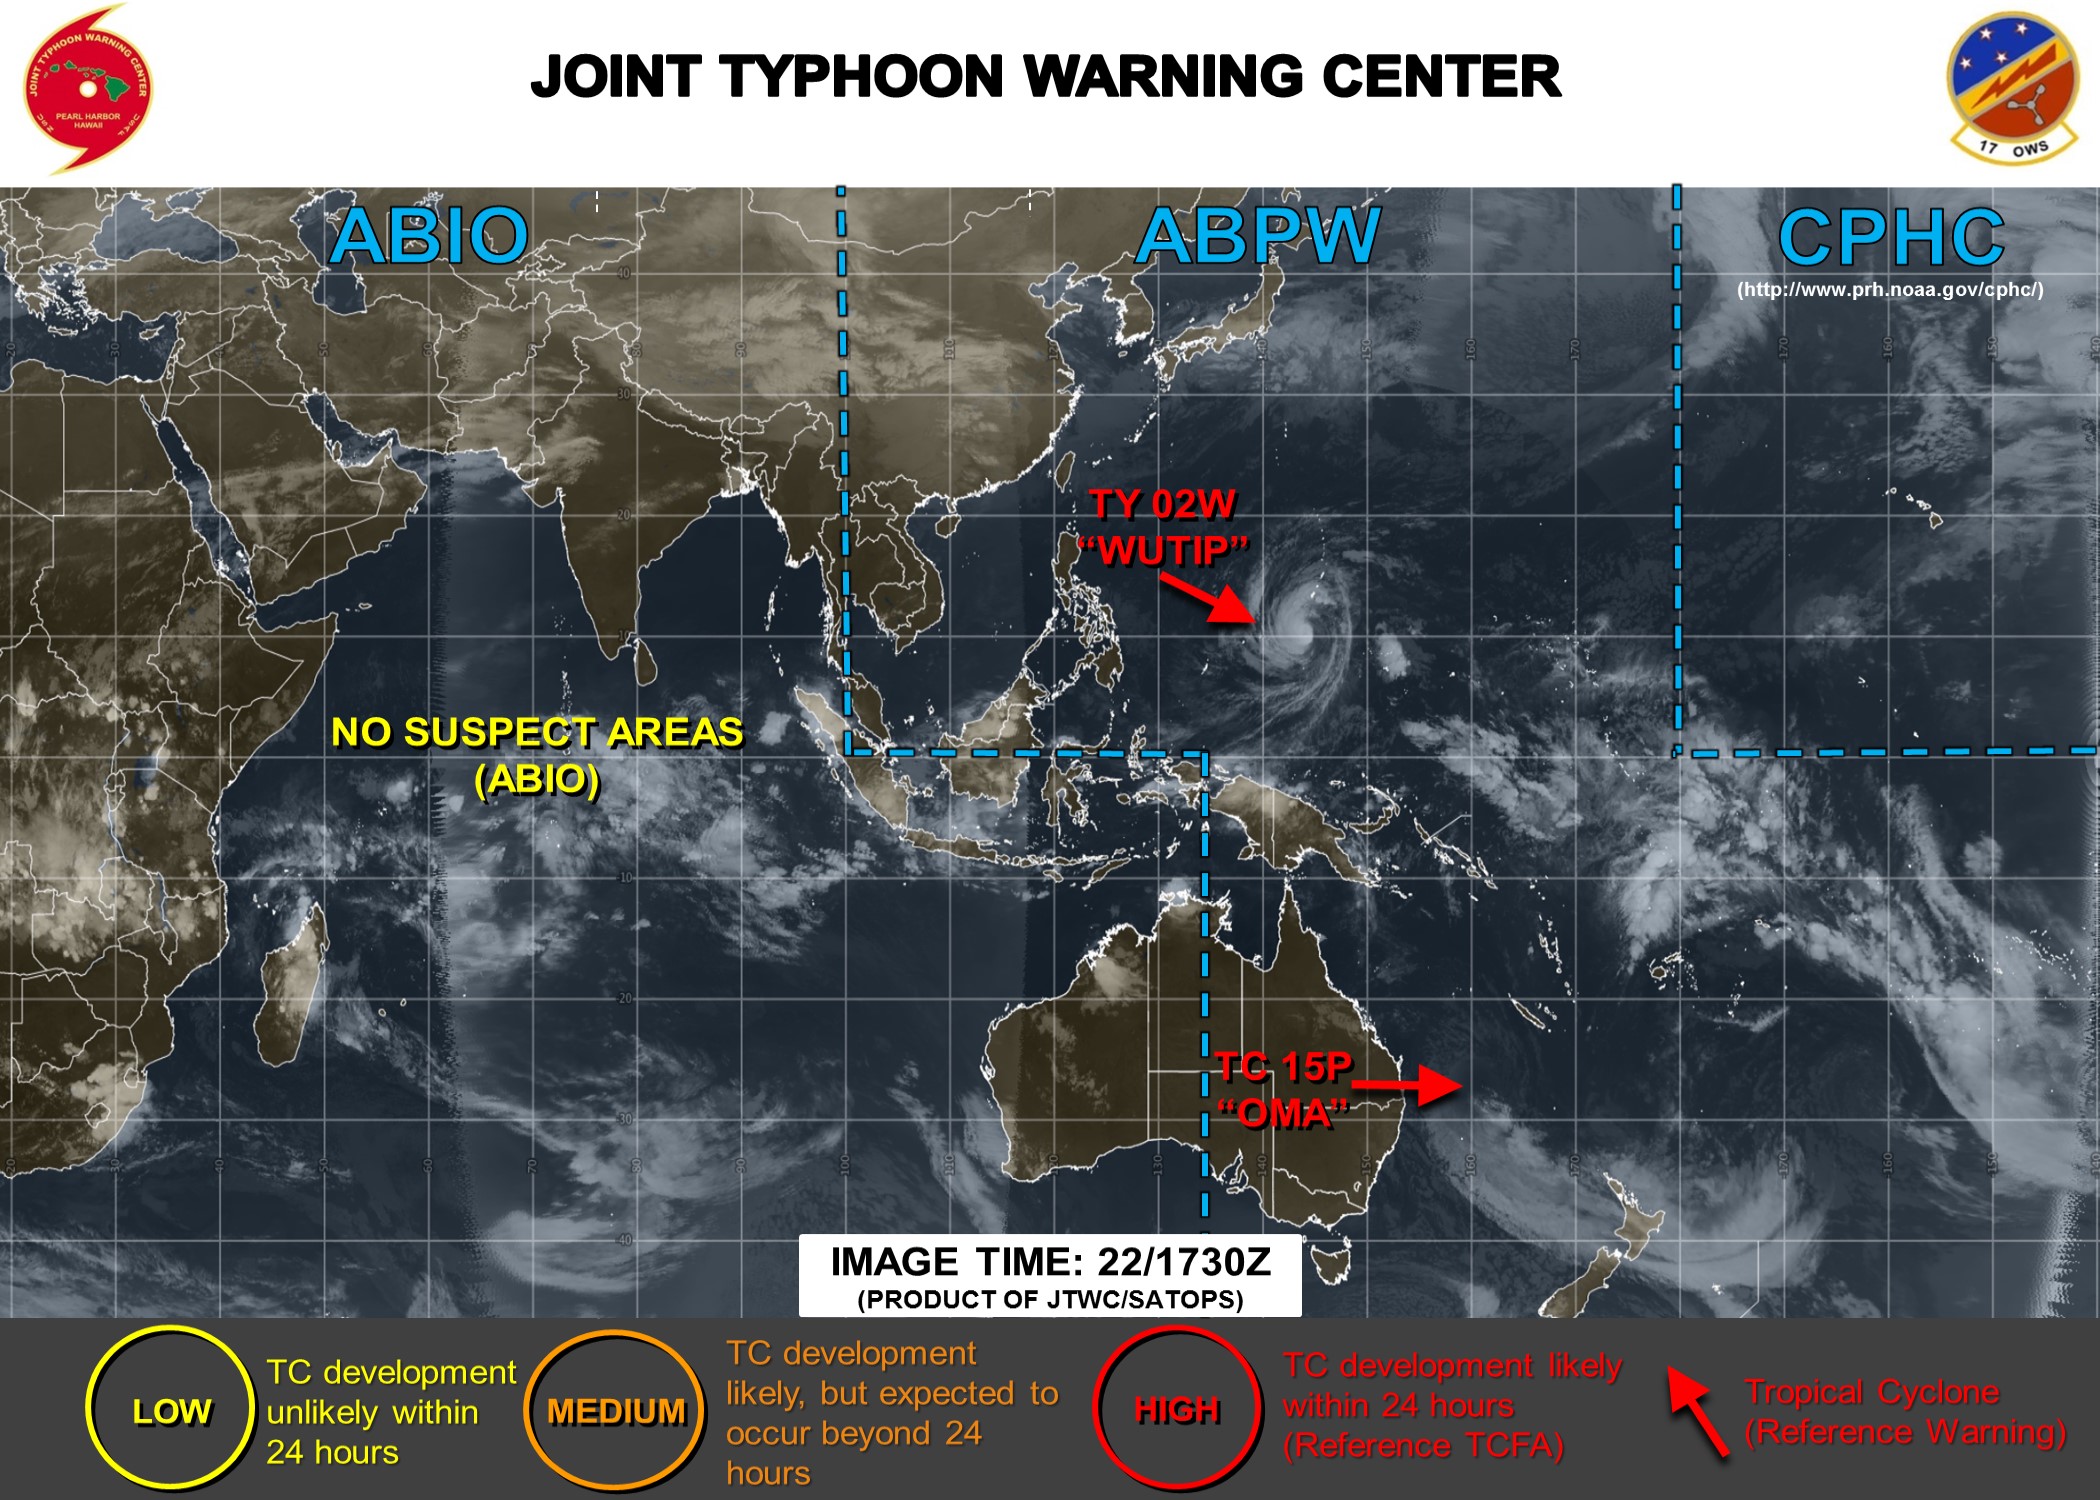 Indian Ocean: CYCLONES: no suspect areas in the foreseeable future at the moment.